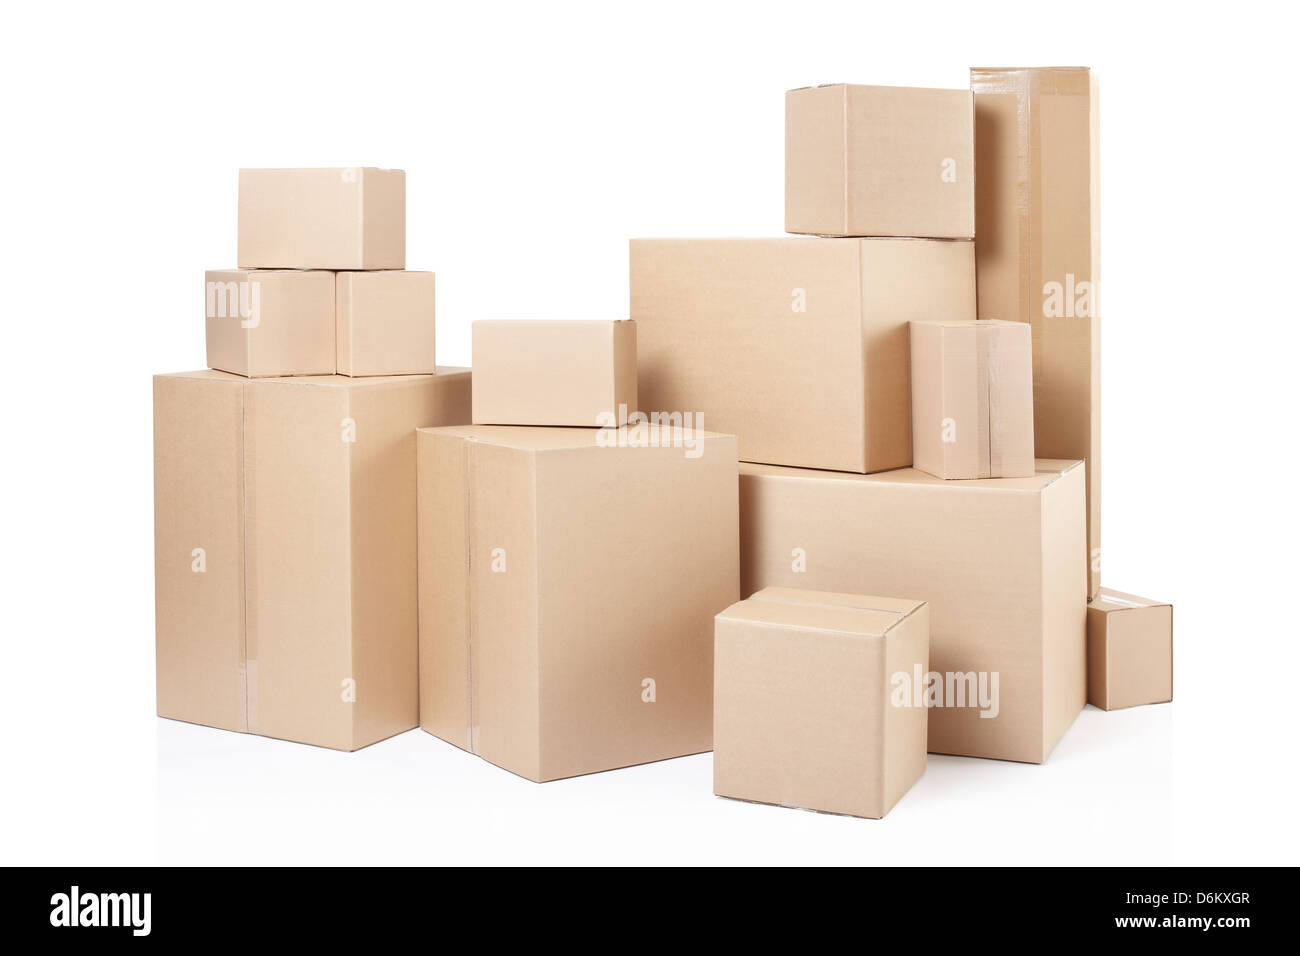 Cardboard boxes stack isolated on white, clipping path included Stock Photo